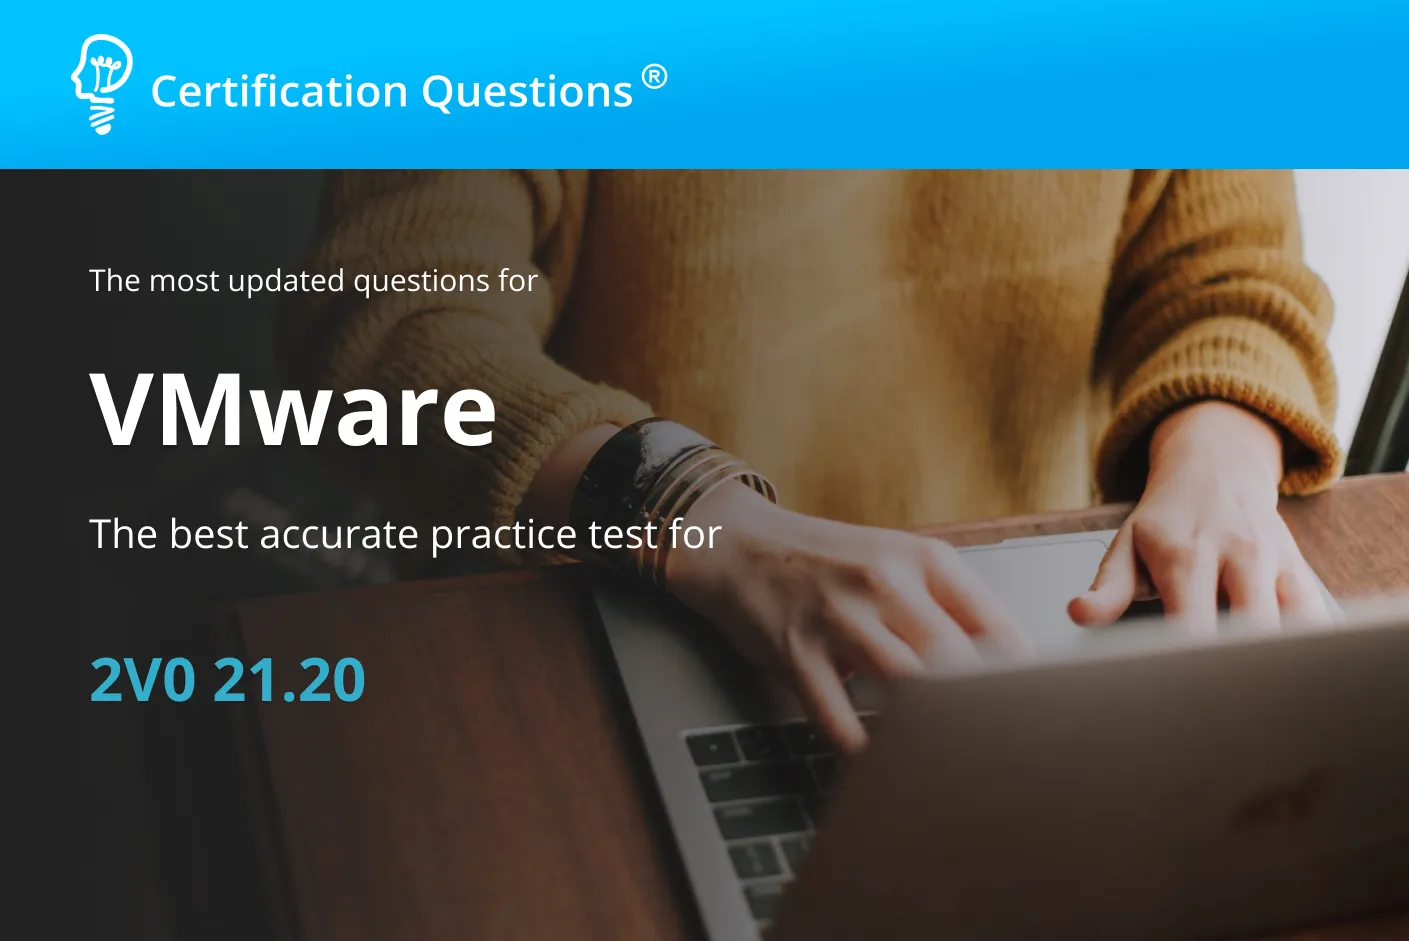 This image represents the VMware VCP-DCV Test Questions for the preparation